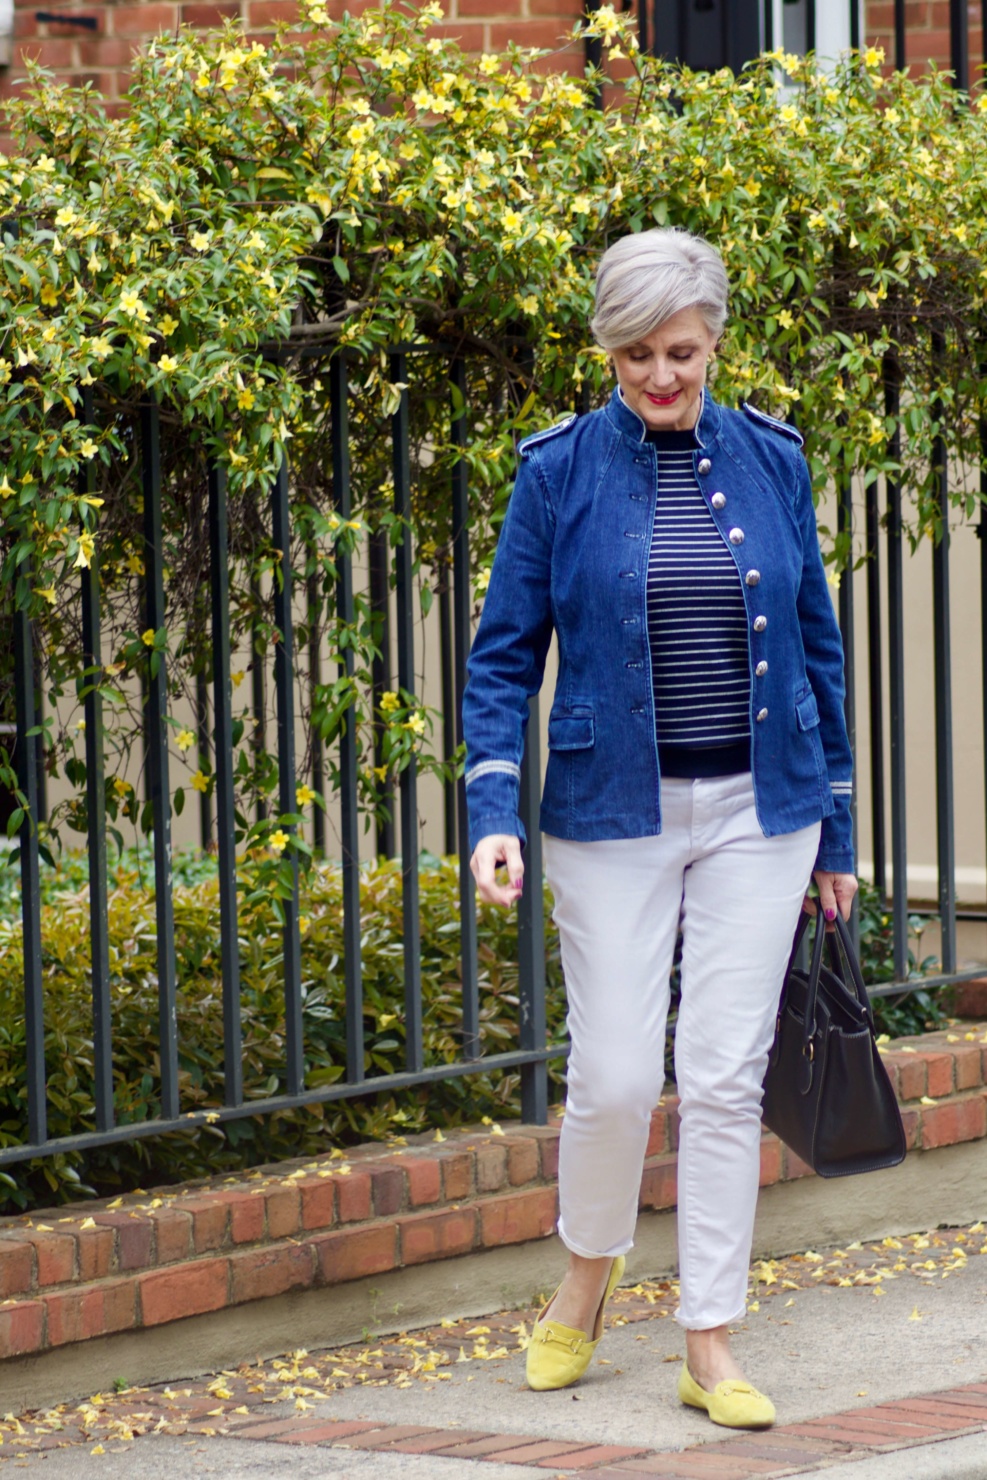 beth from Style at a Certain Age wears a Banana Republic stripe sweater, white denim and a jean jacket